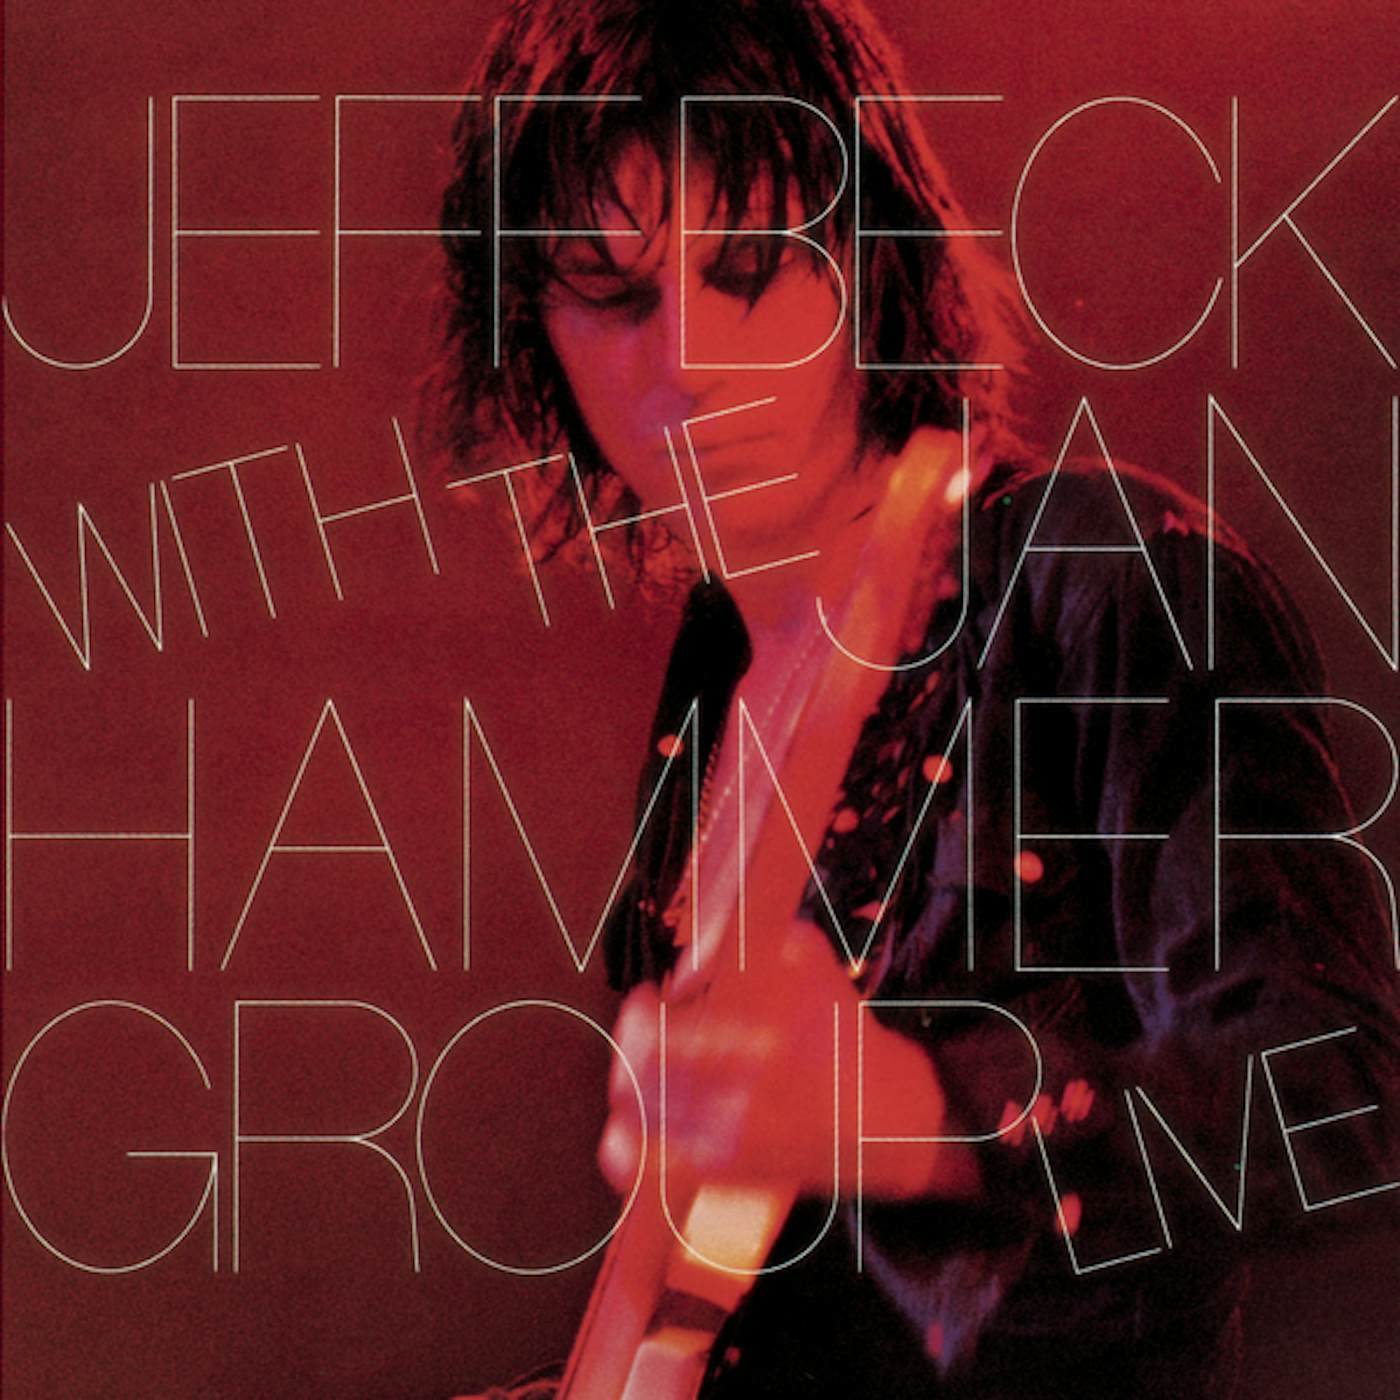 JEFF BECK WITH JAN HAMMER GROUP LIVE CD